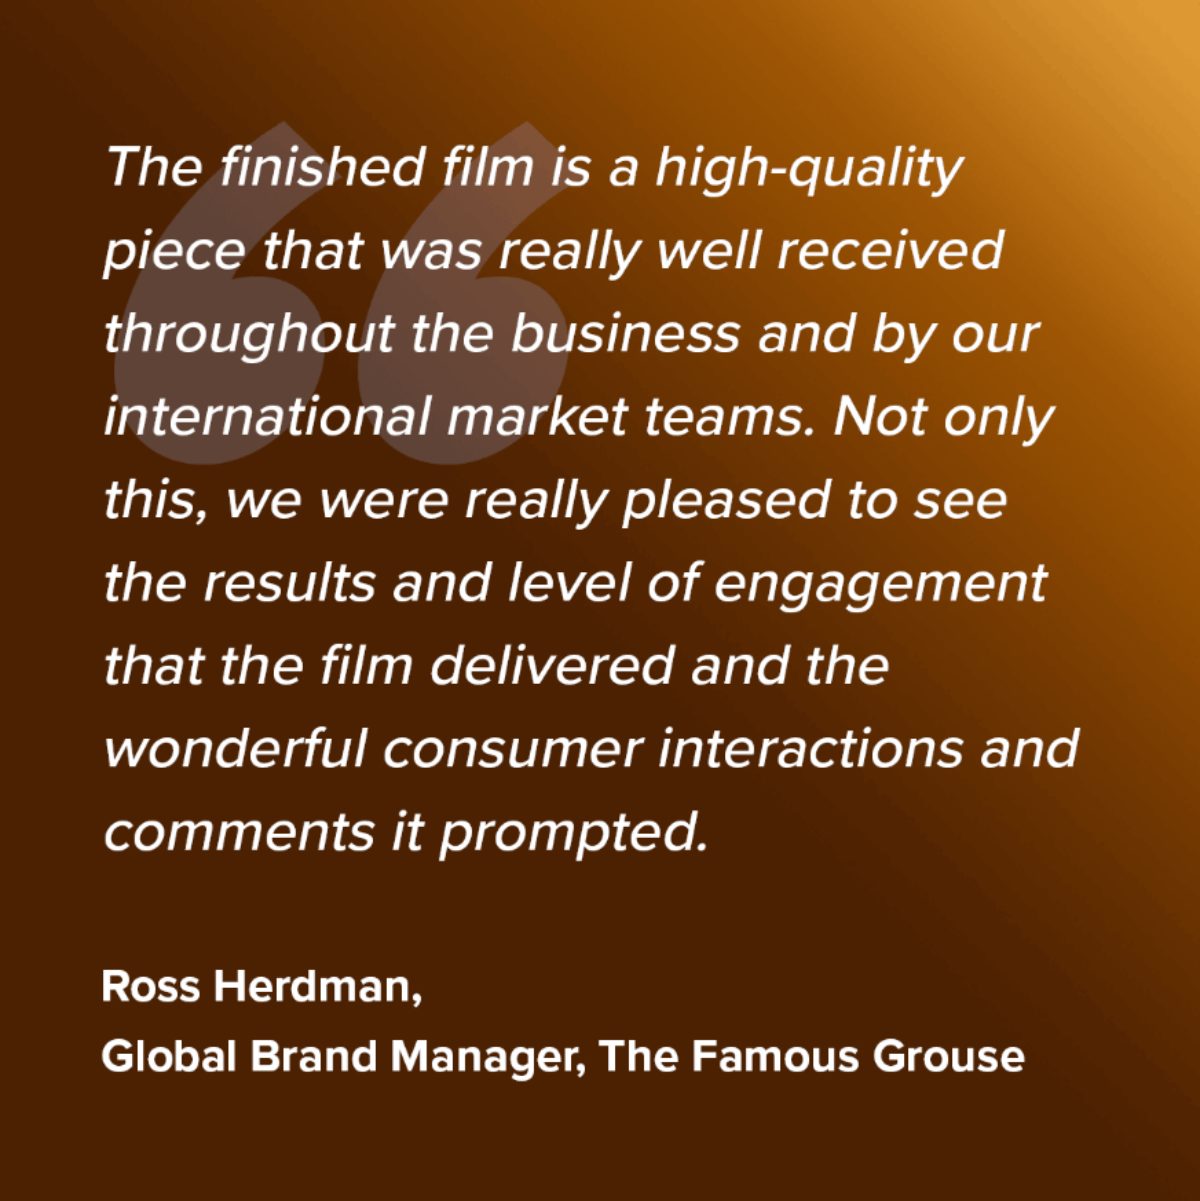 The finished film is a high-quality piece that was really well received throughout the business and by our international market teams. Not only this, we were really pleased to see the results and level of engagement that the film delivered and the wonderful consumer interactions and comments it prompted. - Ross Herdman, Global Brand Manager, The Famous Grouse